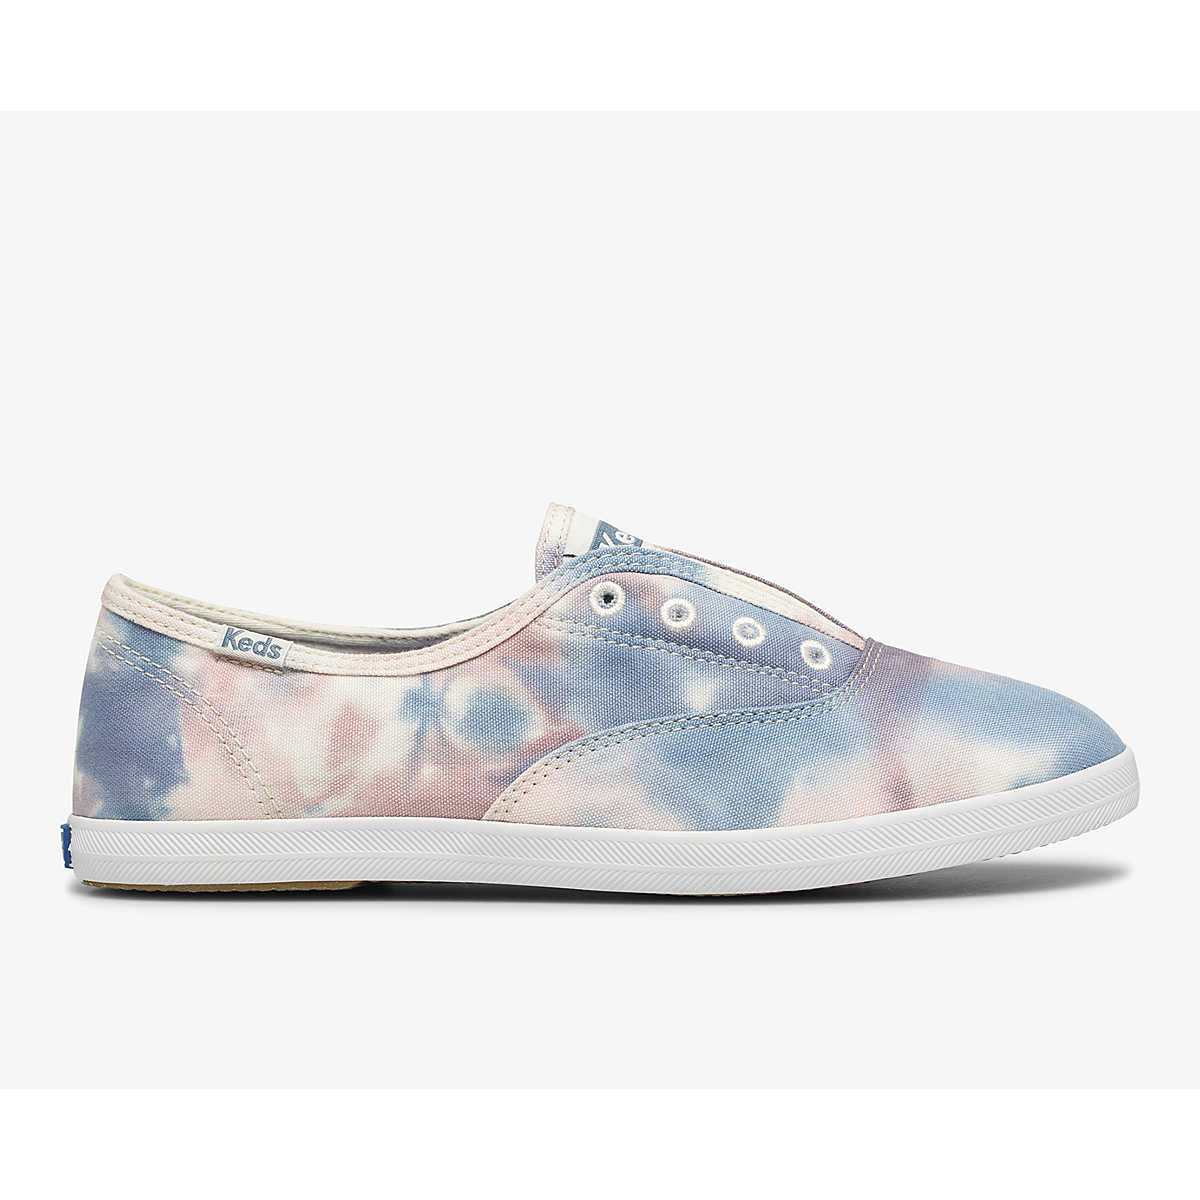 Keds Chillax Washable Feat. Tie Dye Organic Cotton In Pink Blue Multi